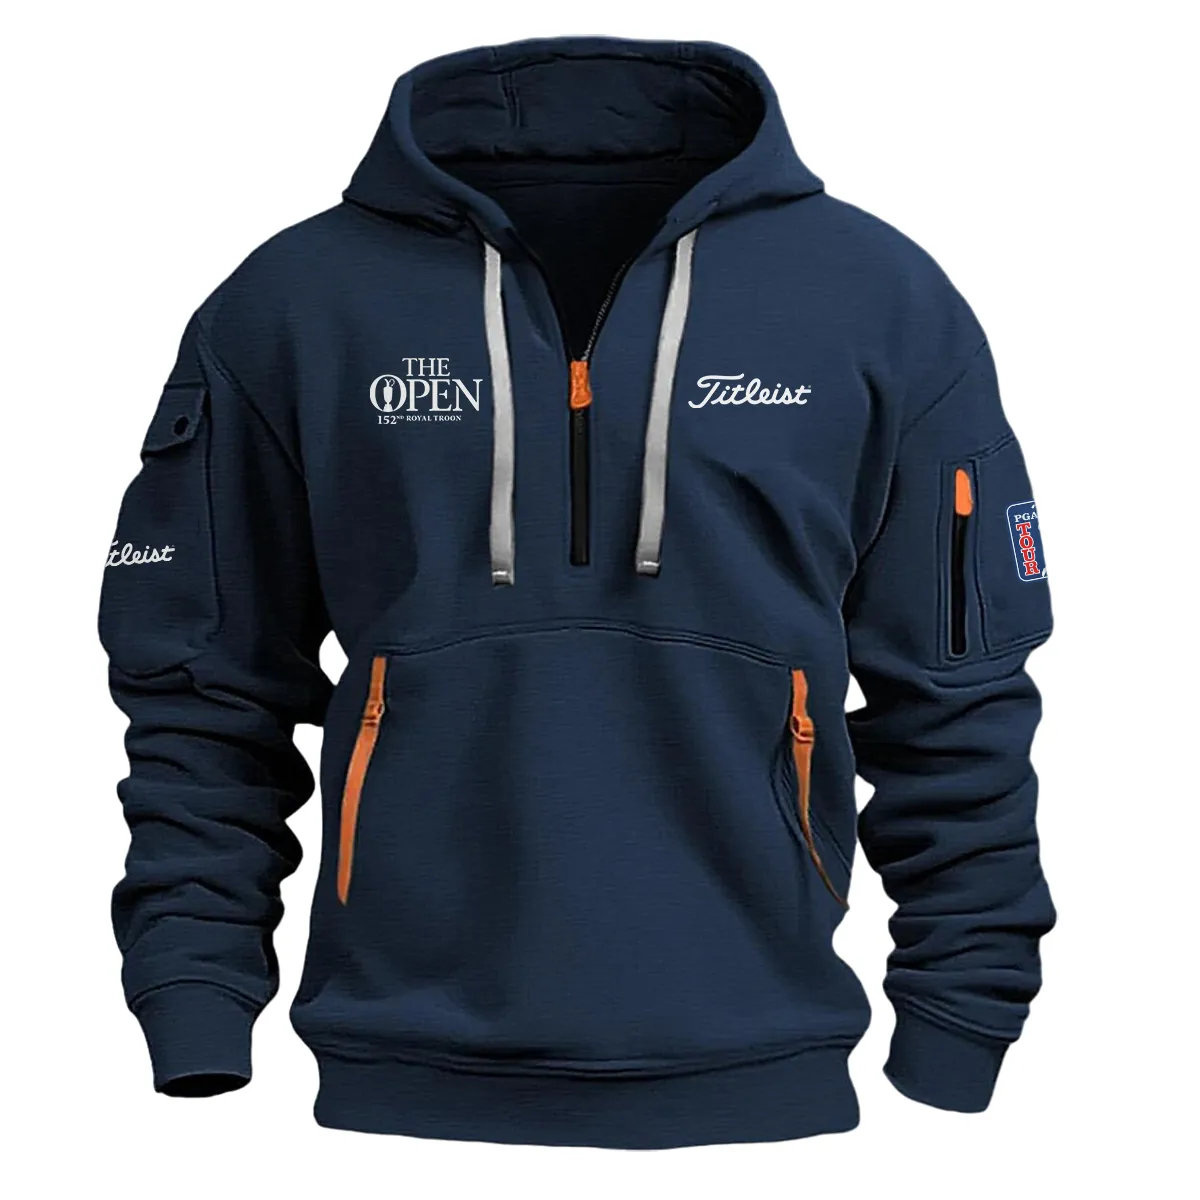 Navy Color Titleist Fashion Hoodie Half Zipper 152nd The Open Championship Gift For Fans